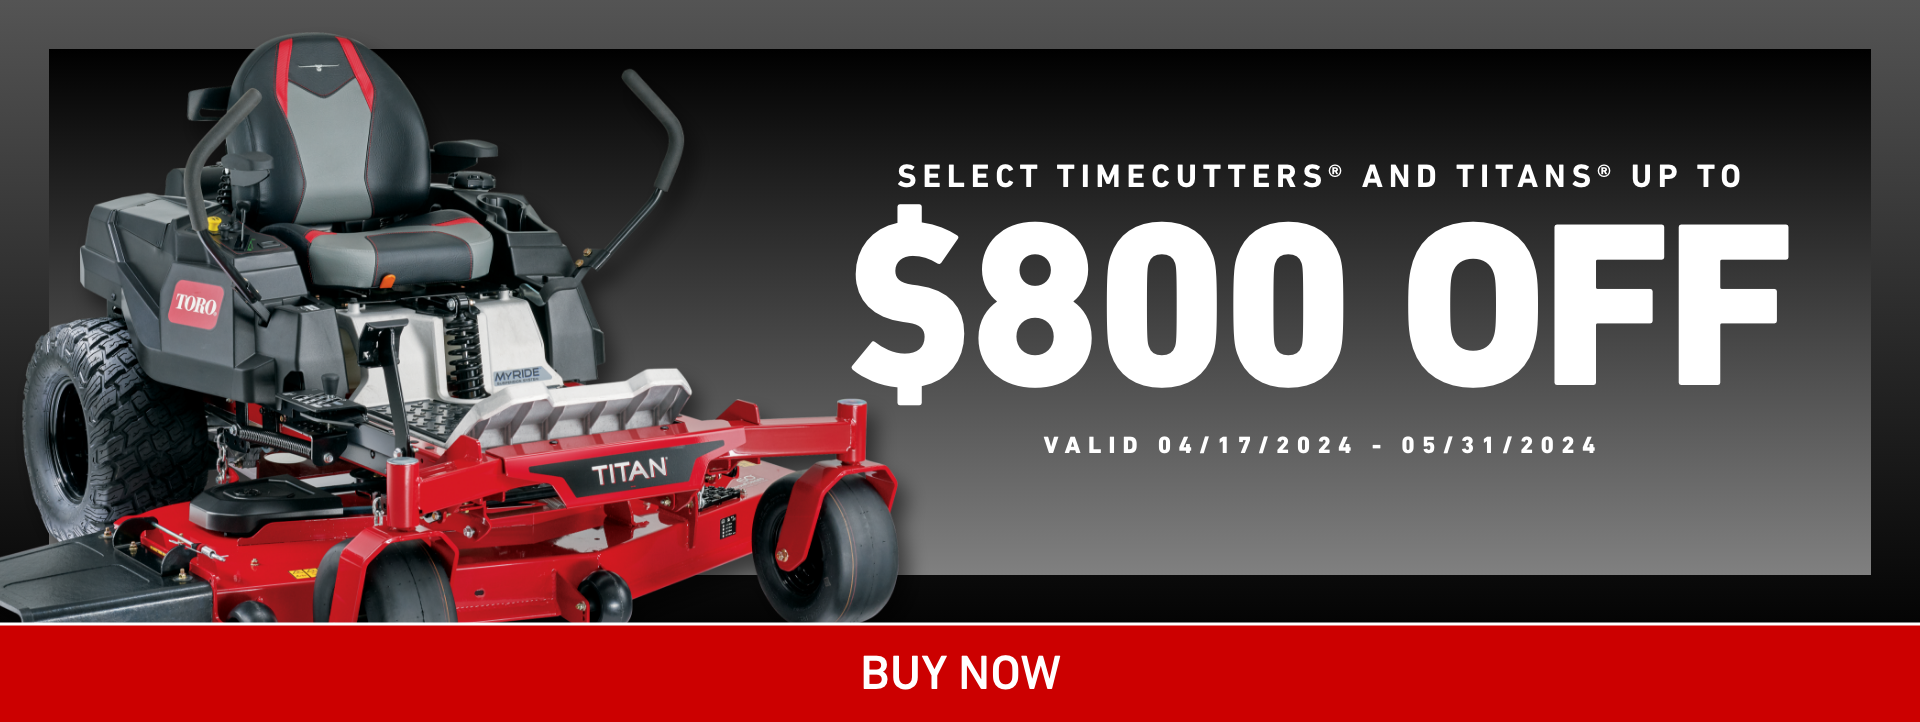 Toro Spring Sale - Save up to $800 off select Titan and TimeCutter zero turn mowers